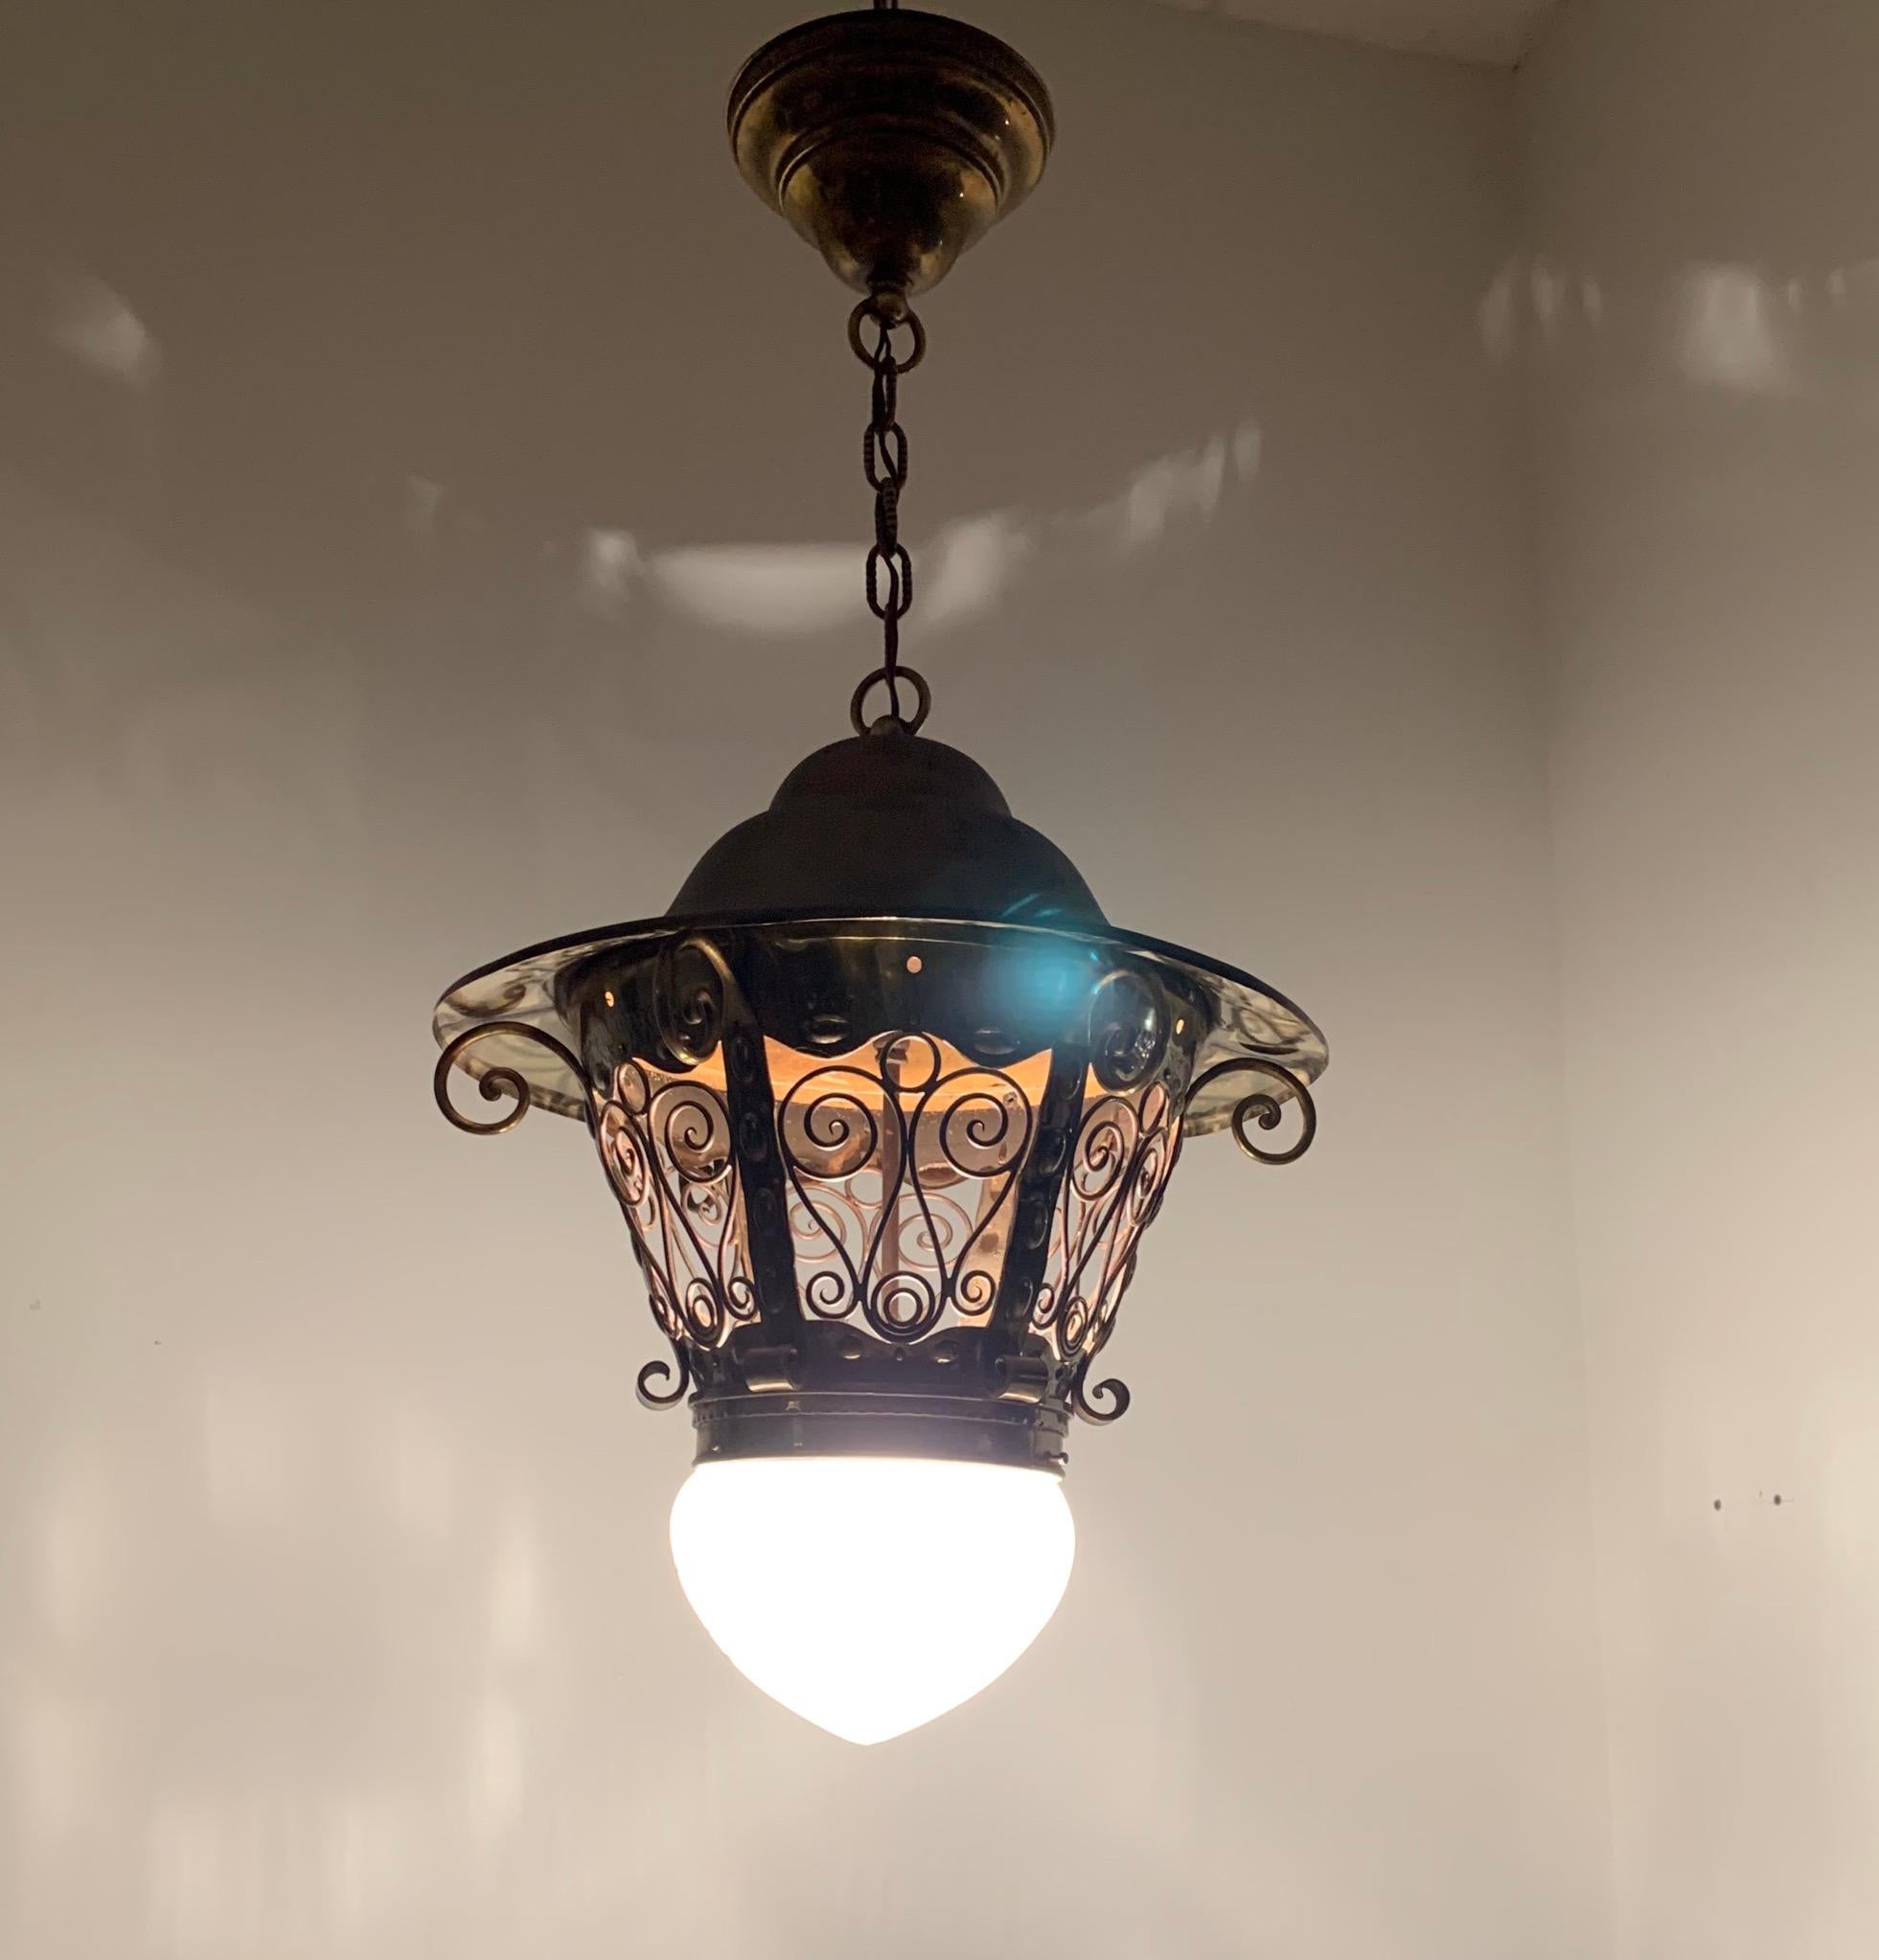 Large Late 19th Century Brass & Glass Arts and Crafts Pendant / Light Fixture For Sale 12